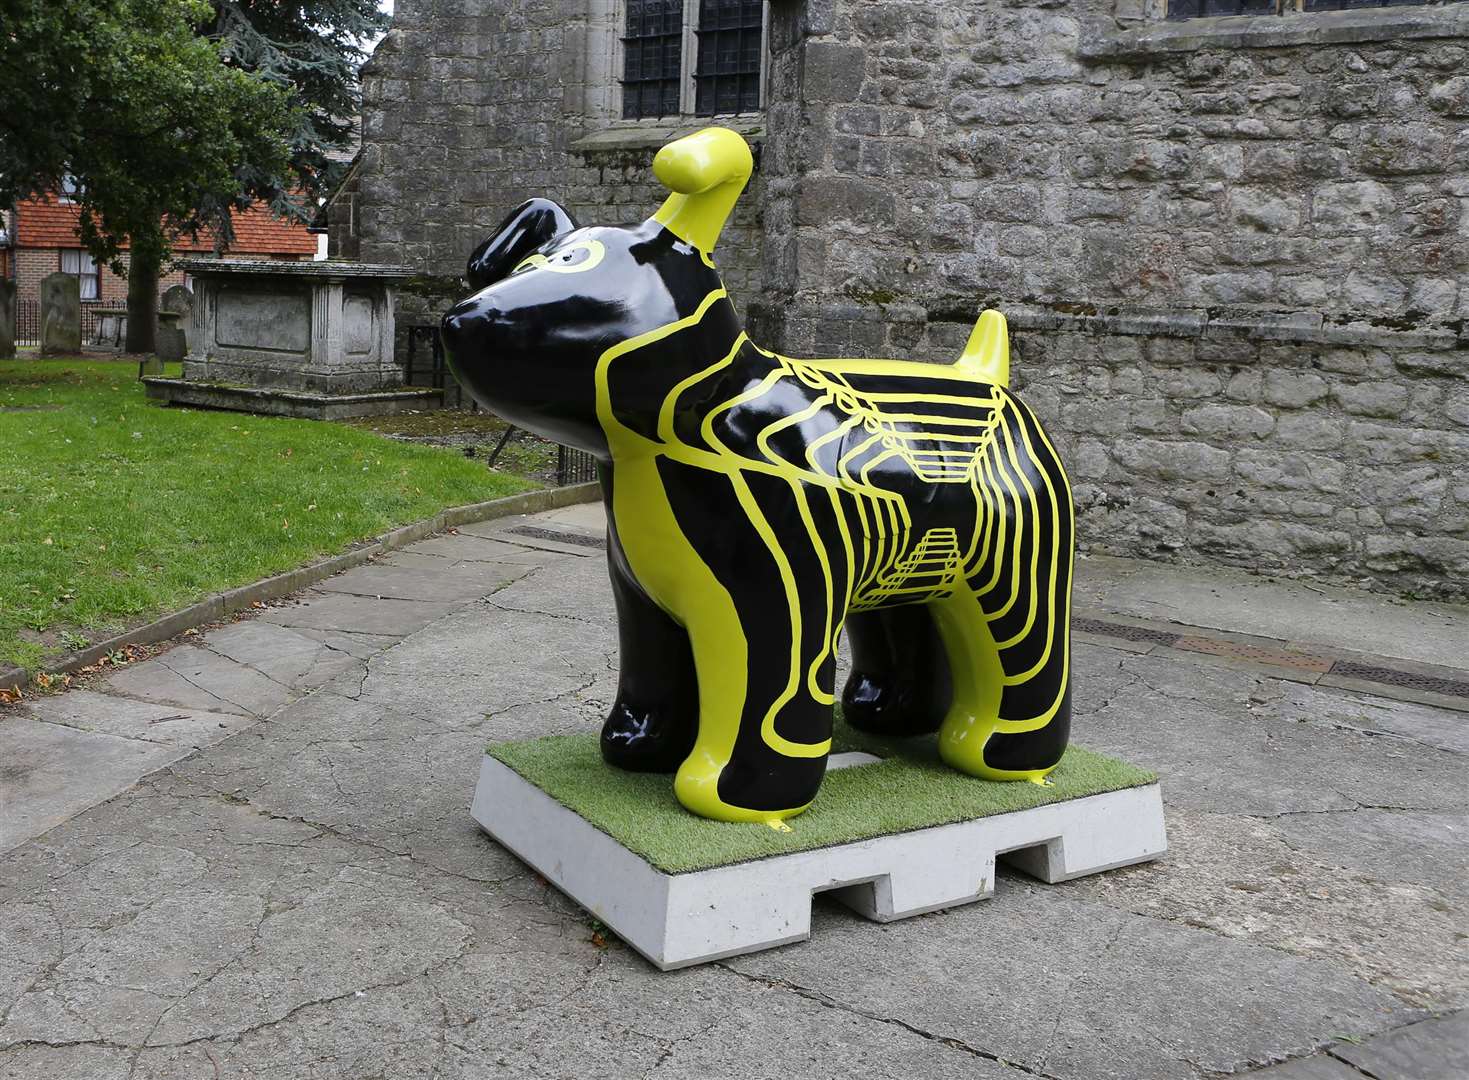 The Infinity Dog was removed from its original location at the North door of St Mary's Church